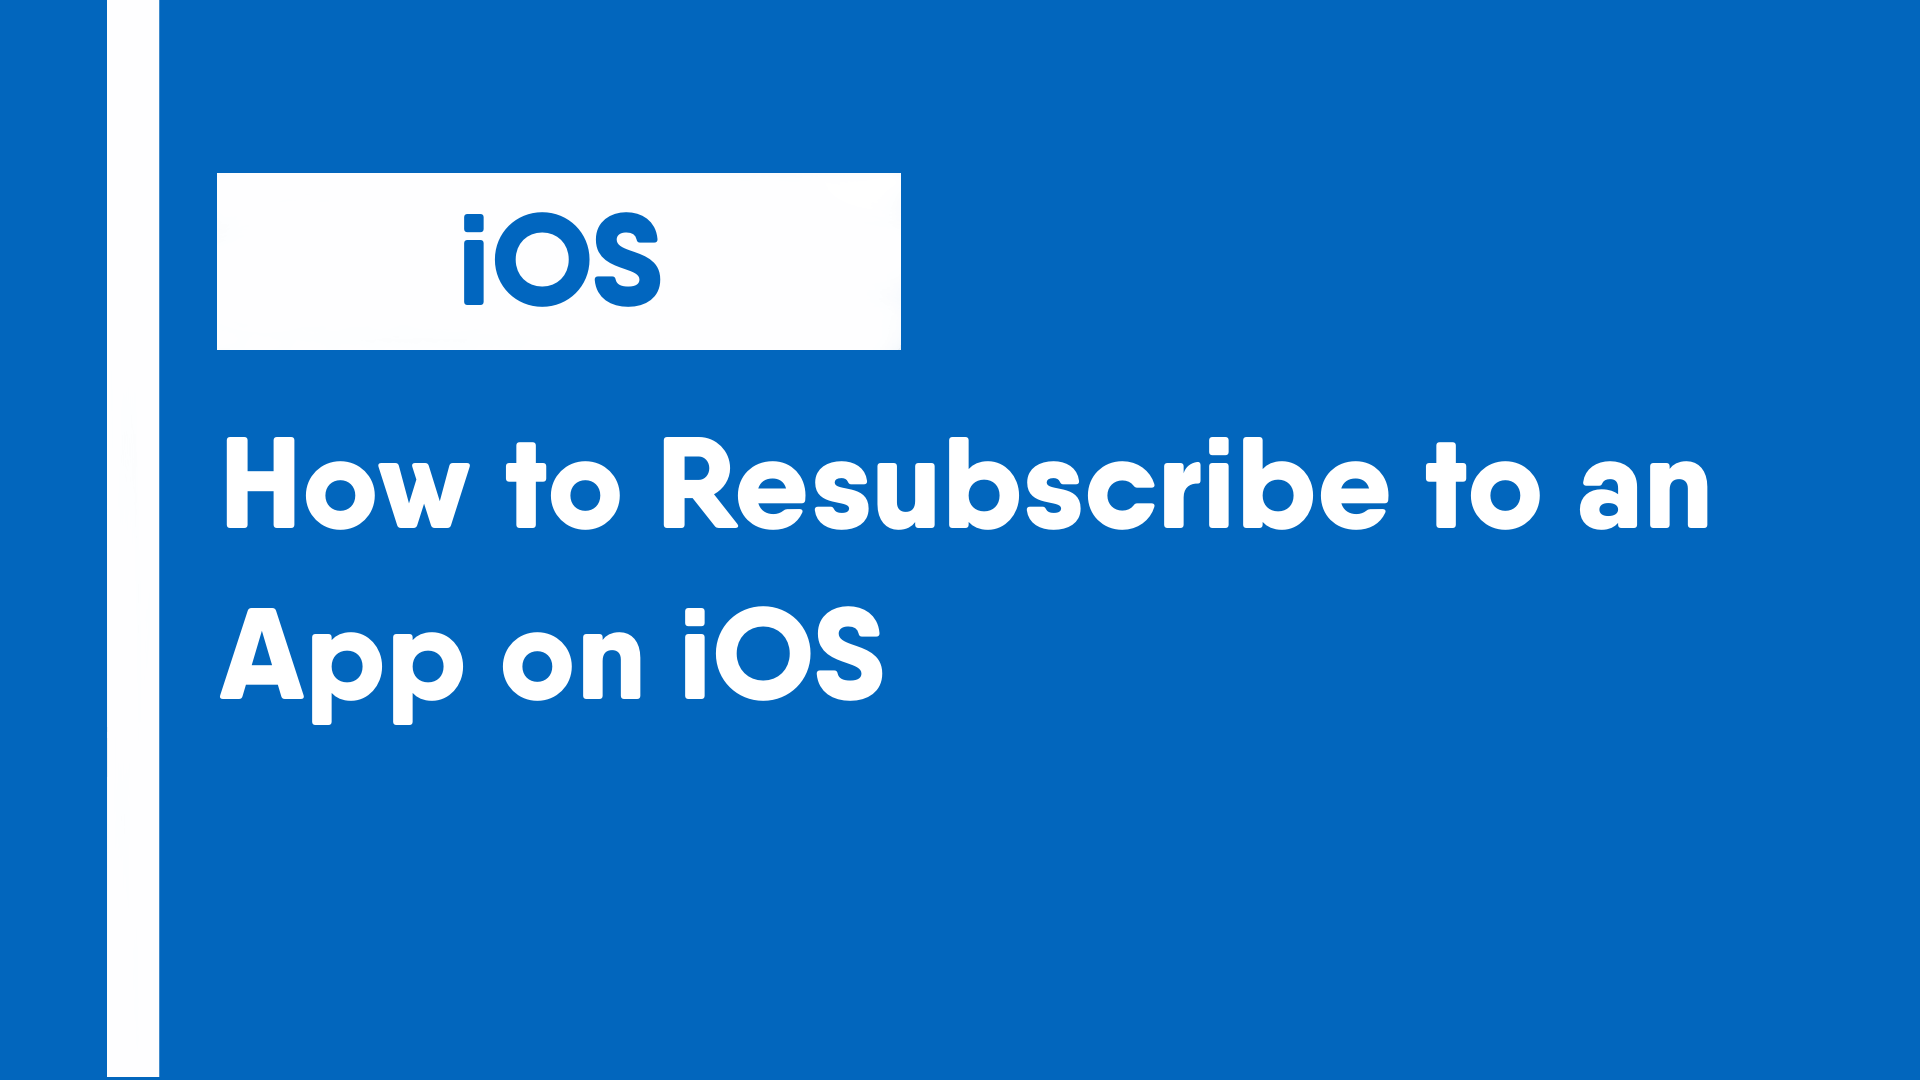 How to Resubscribe to an App on iOS